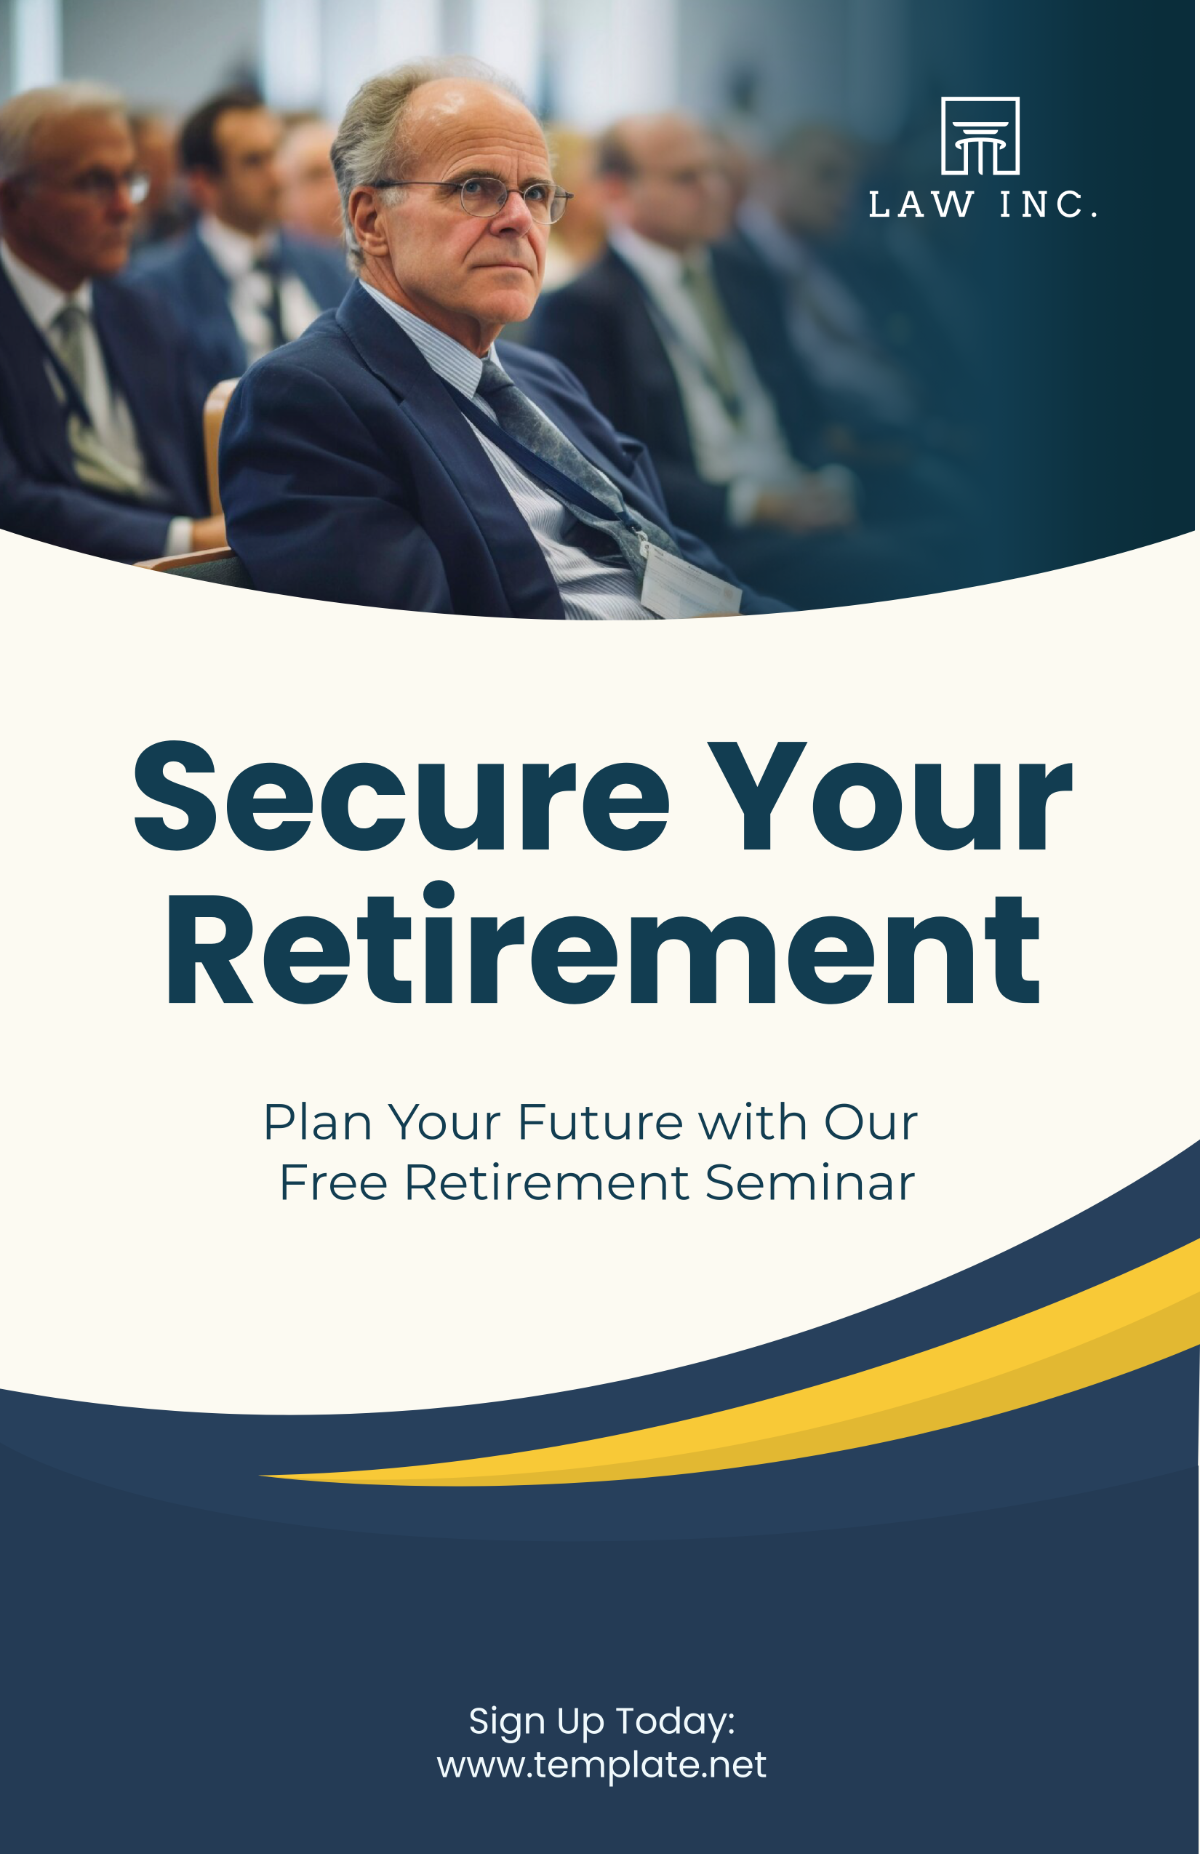 Law Firm Retirement Poster